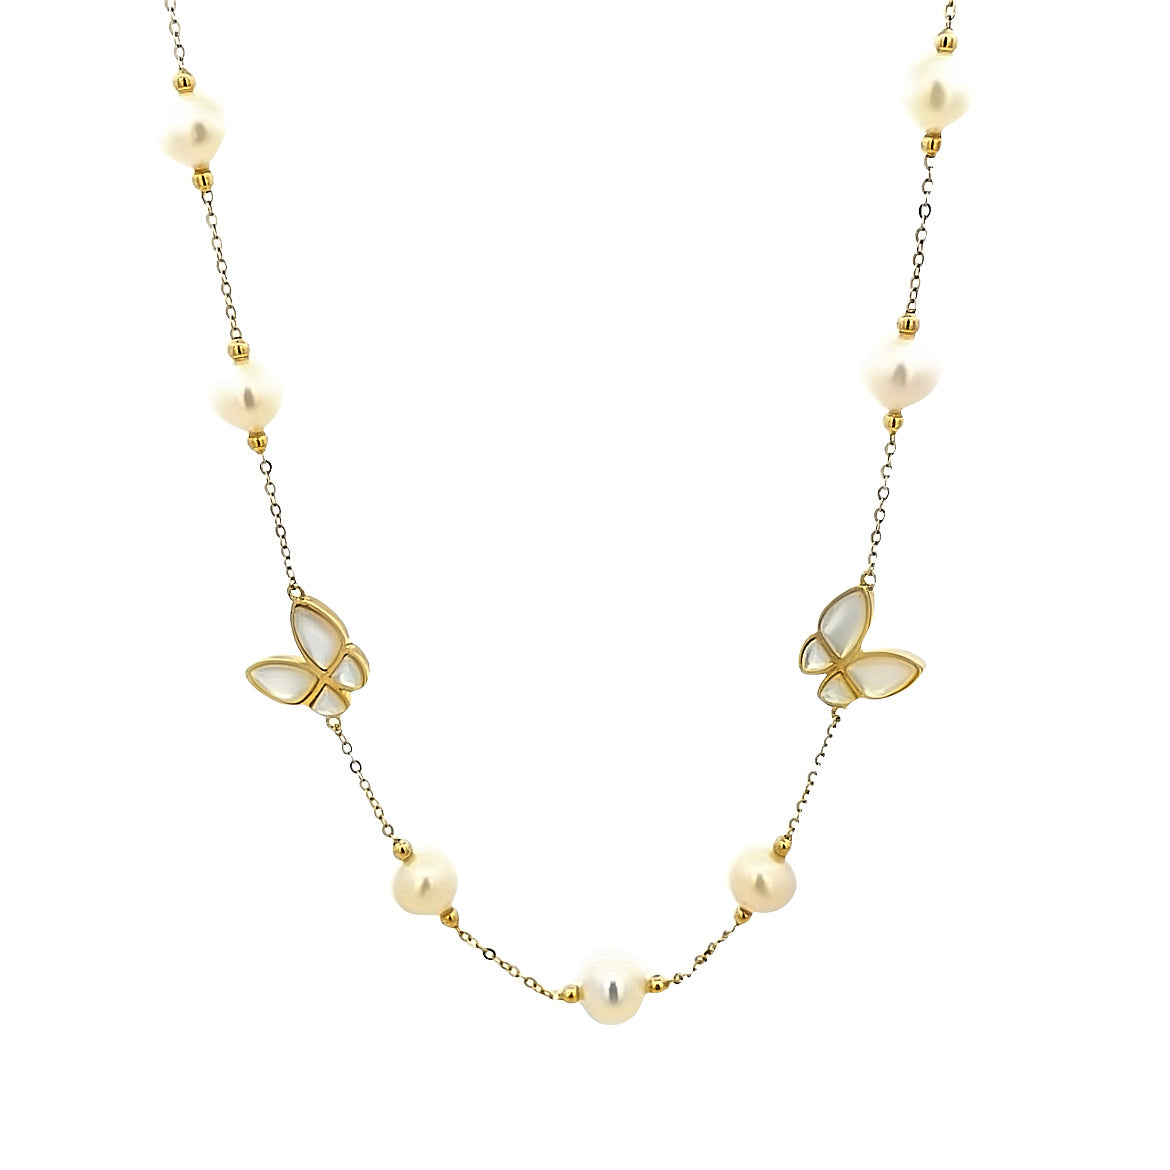 18K GOLD BUTTERFLY NECKLACE WITH MOTHER OF PEARL AND PEARLS